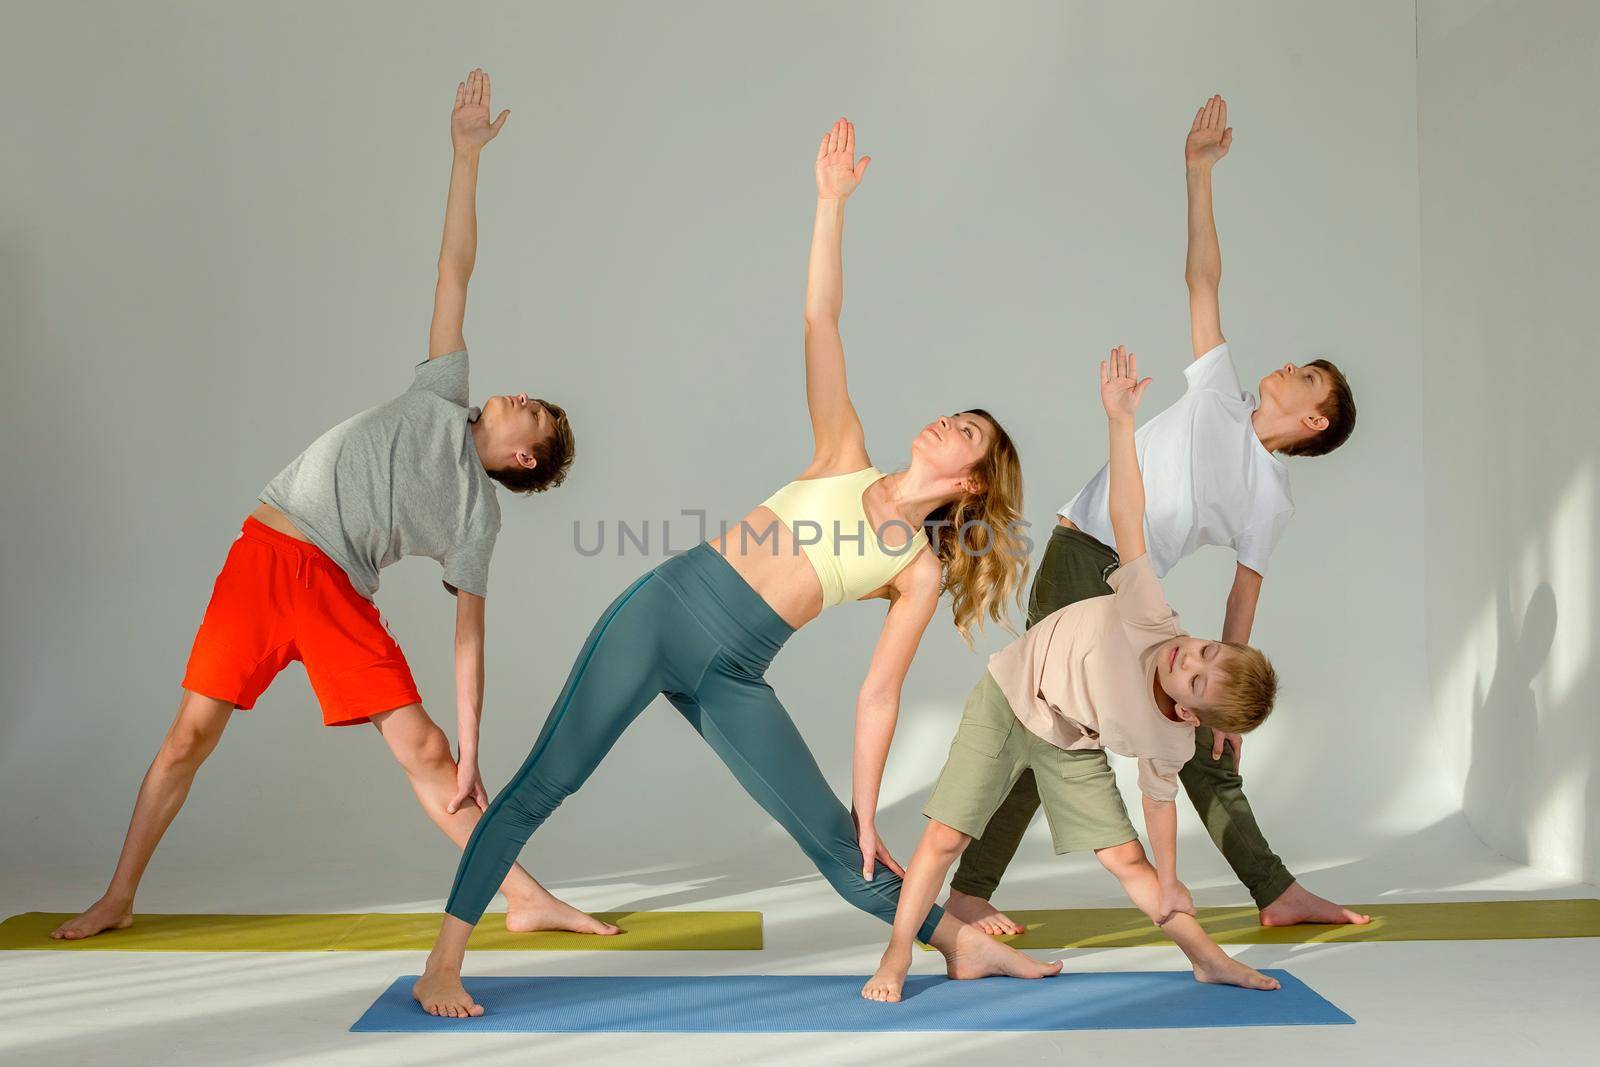 Sports family, slim woman, boy and two teenagers perform yoga exercise, stand on mat in a triangle pose, in a sunny studio.